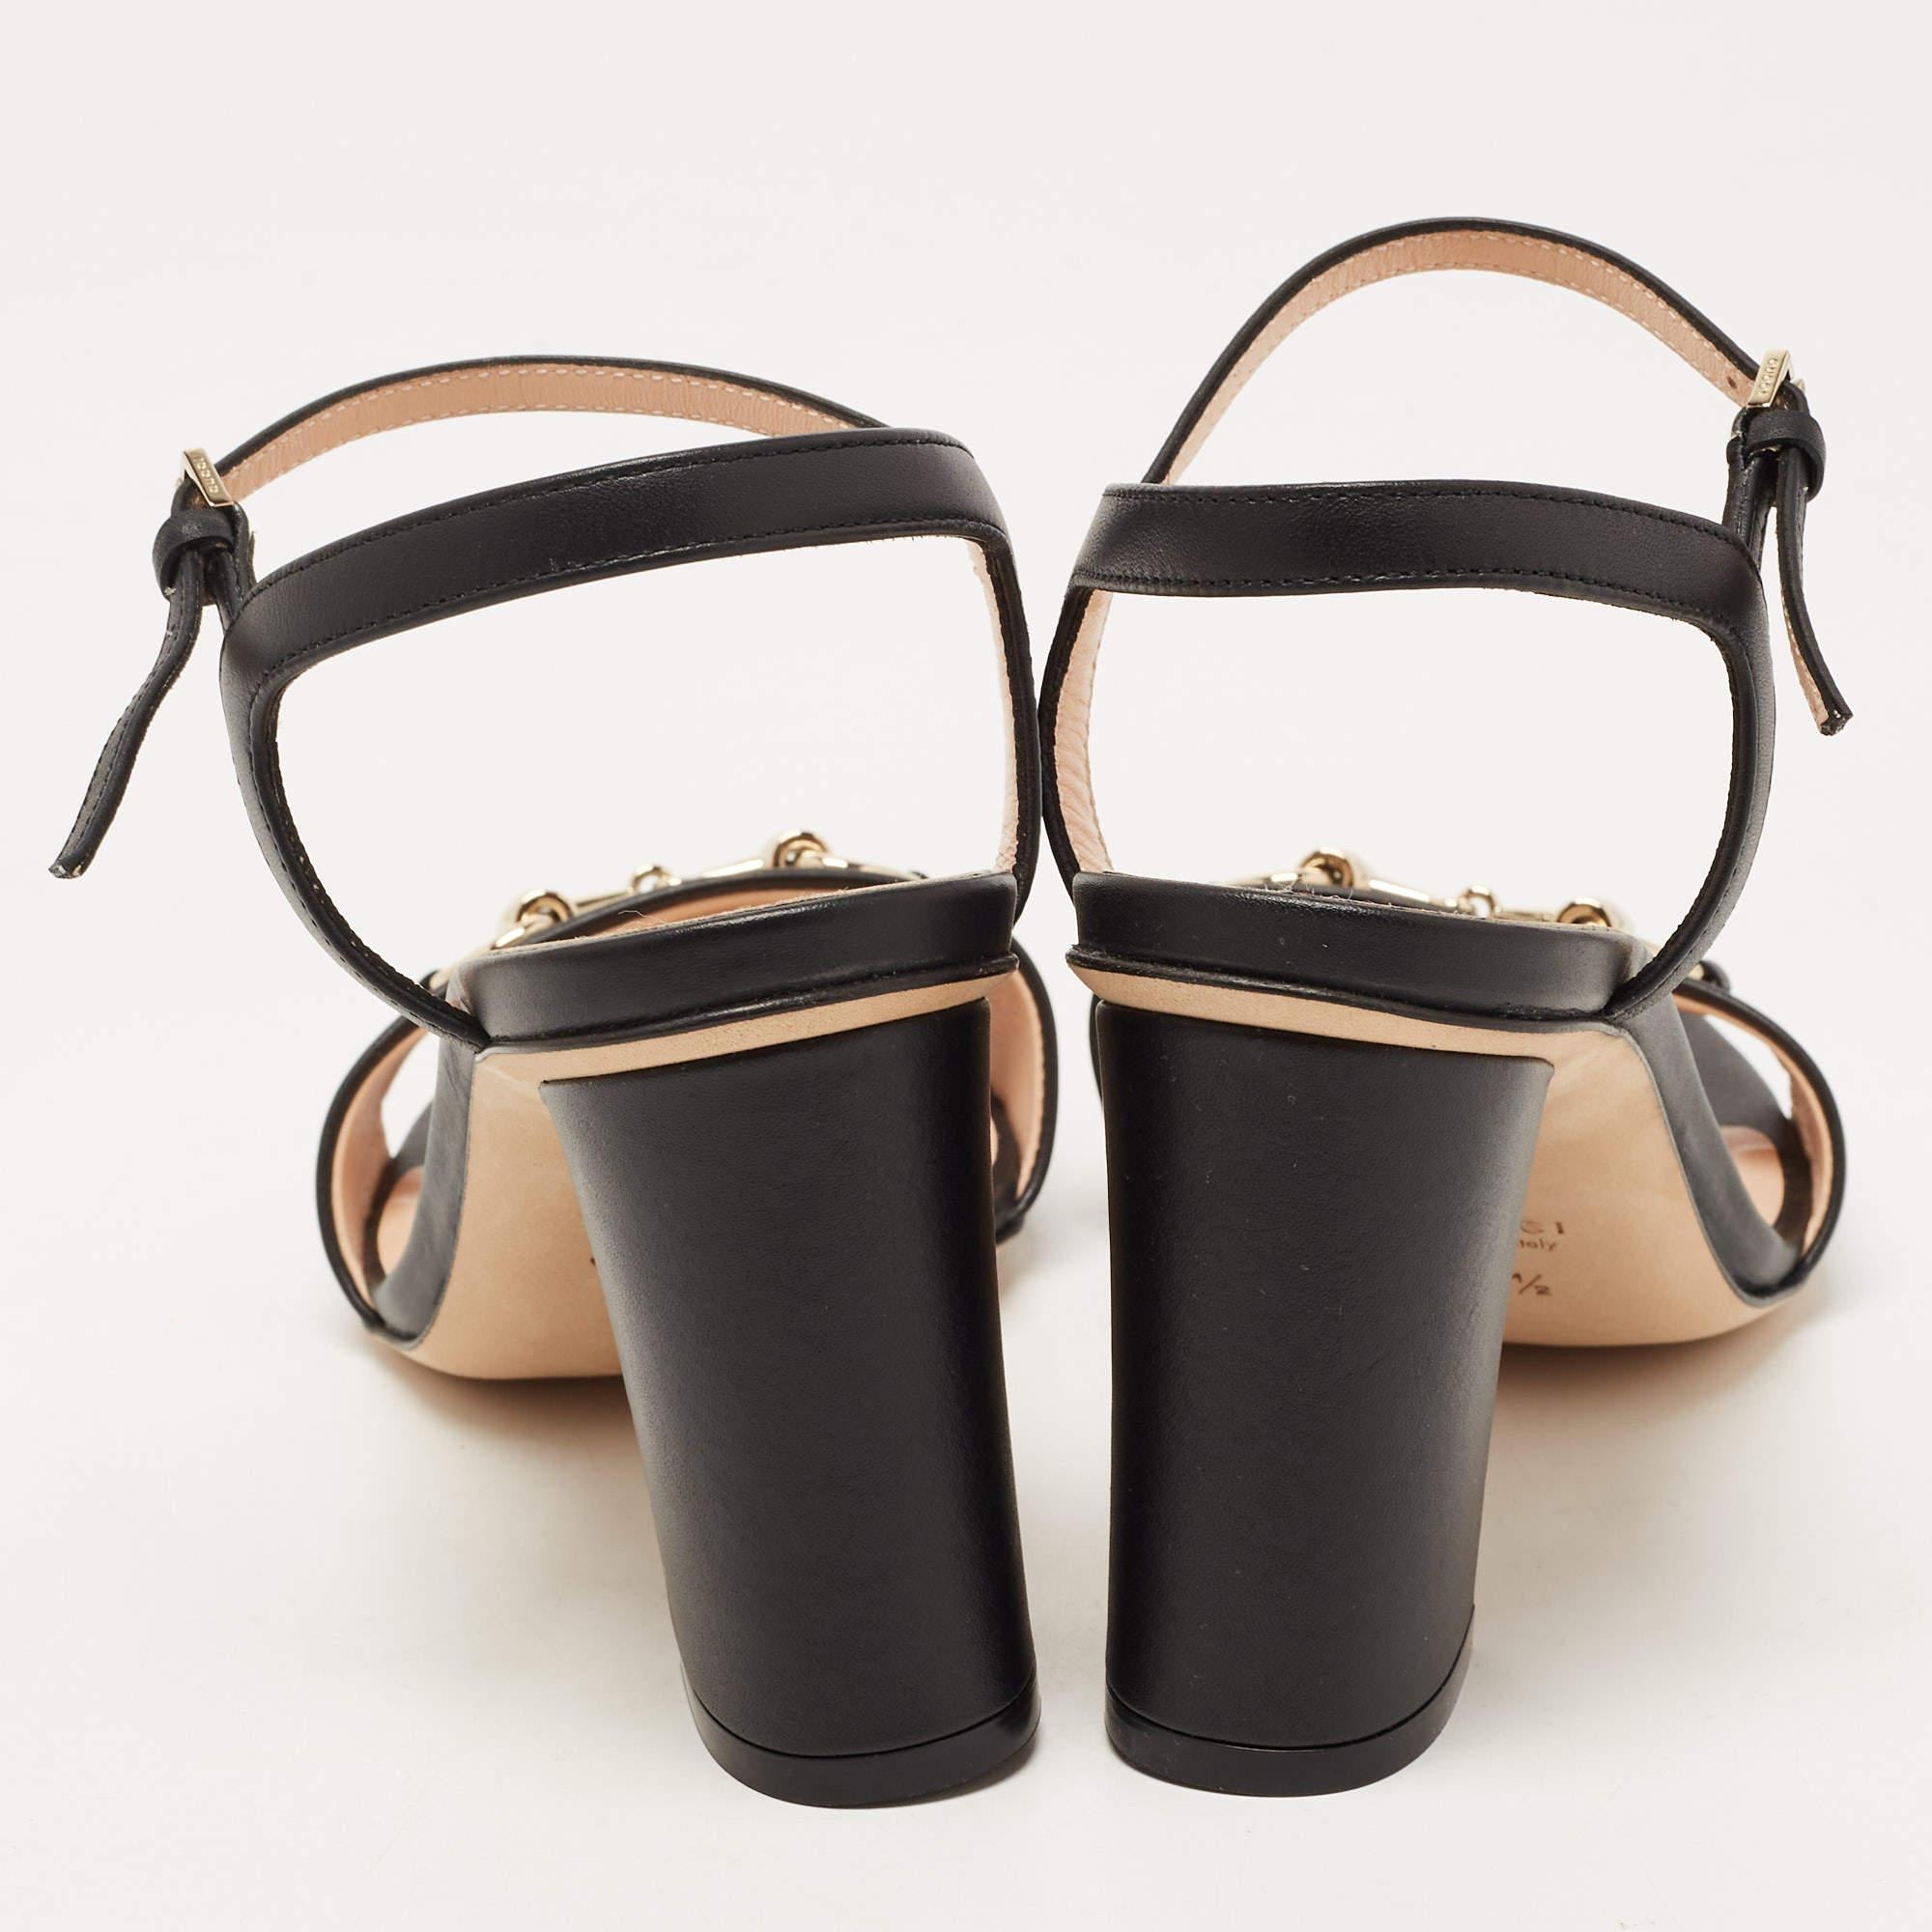 These sandals will frame your feet in an elegant manner. Crafted from quality materials, they flaunt a classy display, comfortable insoles & durable heels.

Includes: Original Dustbag, Info Booklet